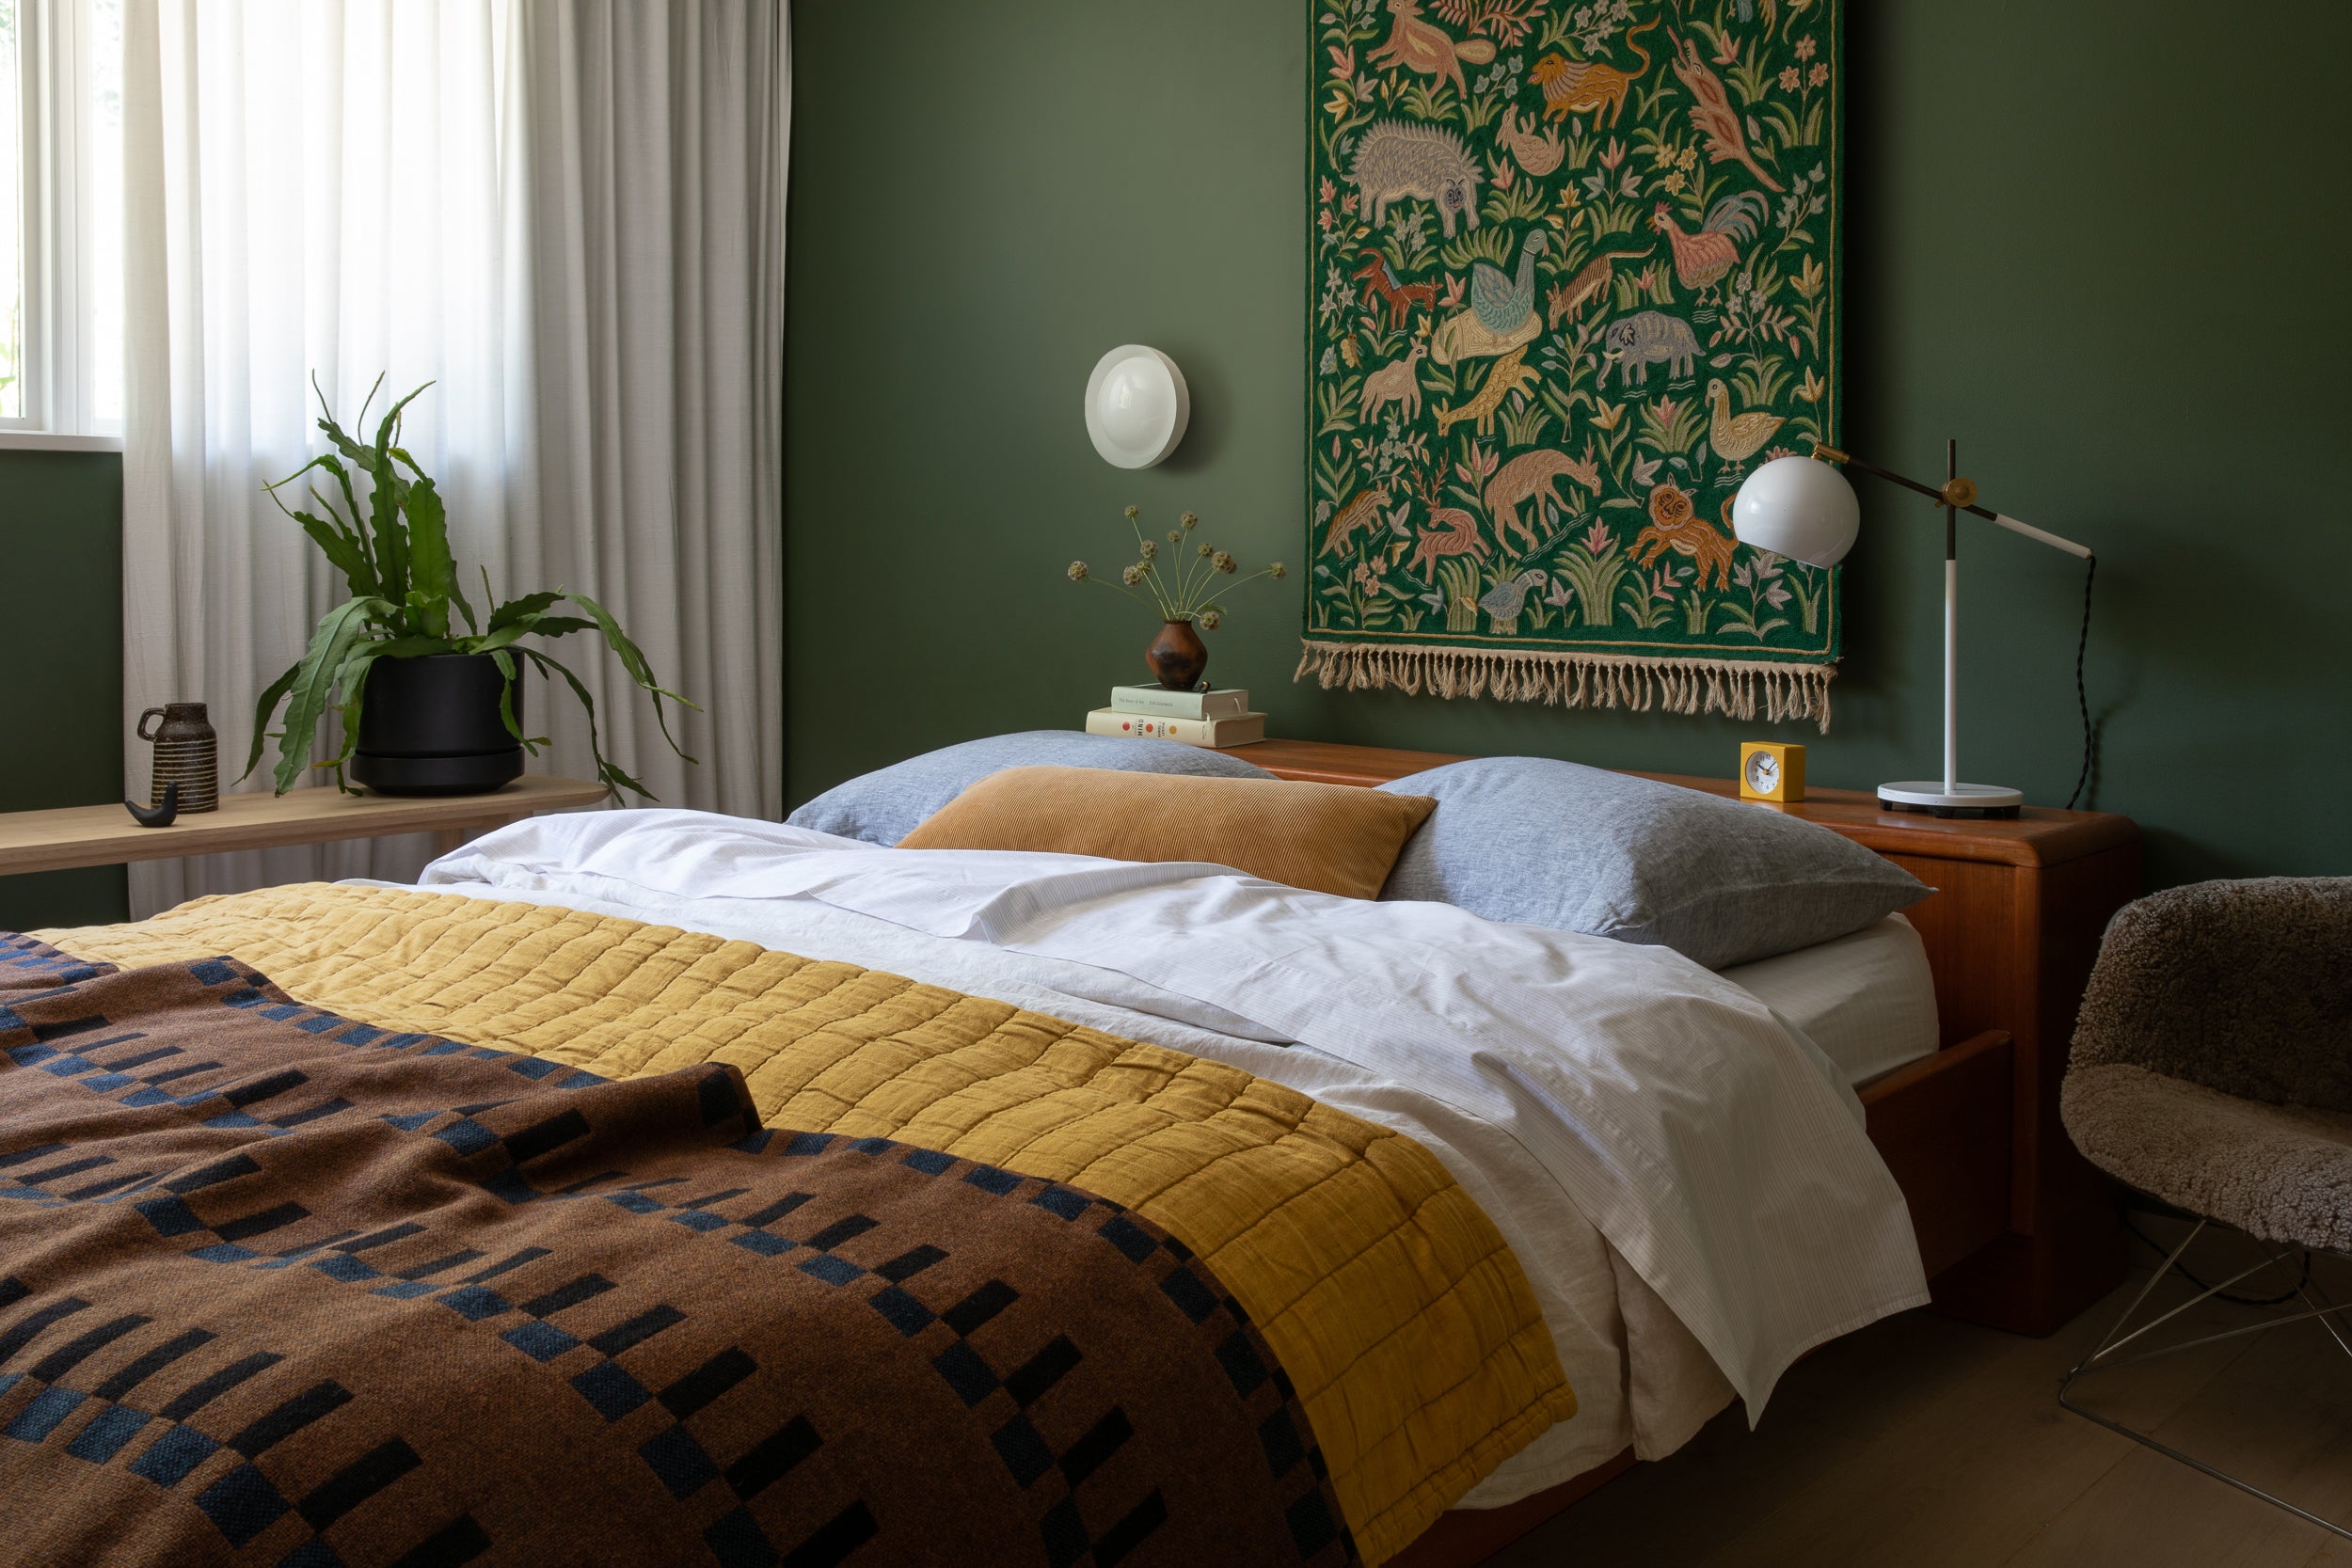 bed with a yellow blanket and a green tapestry on the wall